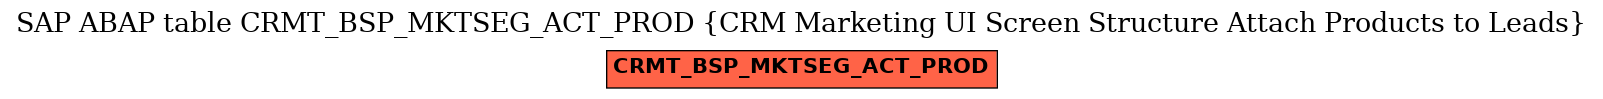 E-R Diagram for table CRMT_BSP_MKTSEG_ACT_PROD (CRM Marketing UI Screen Structure Attach Products to Leads)